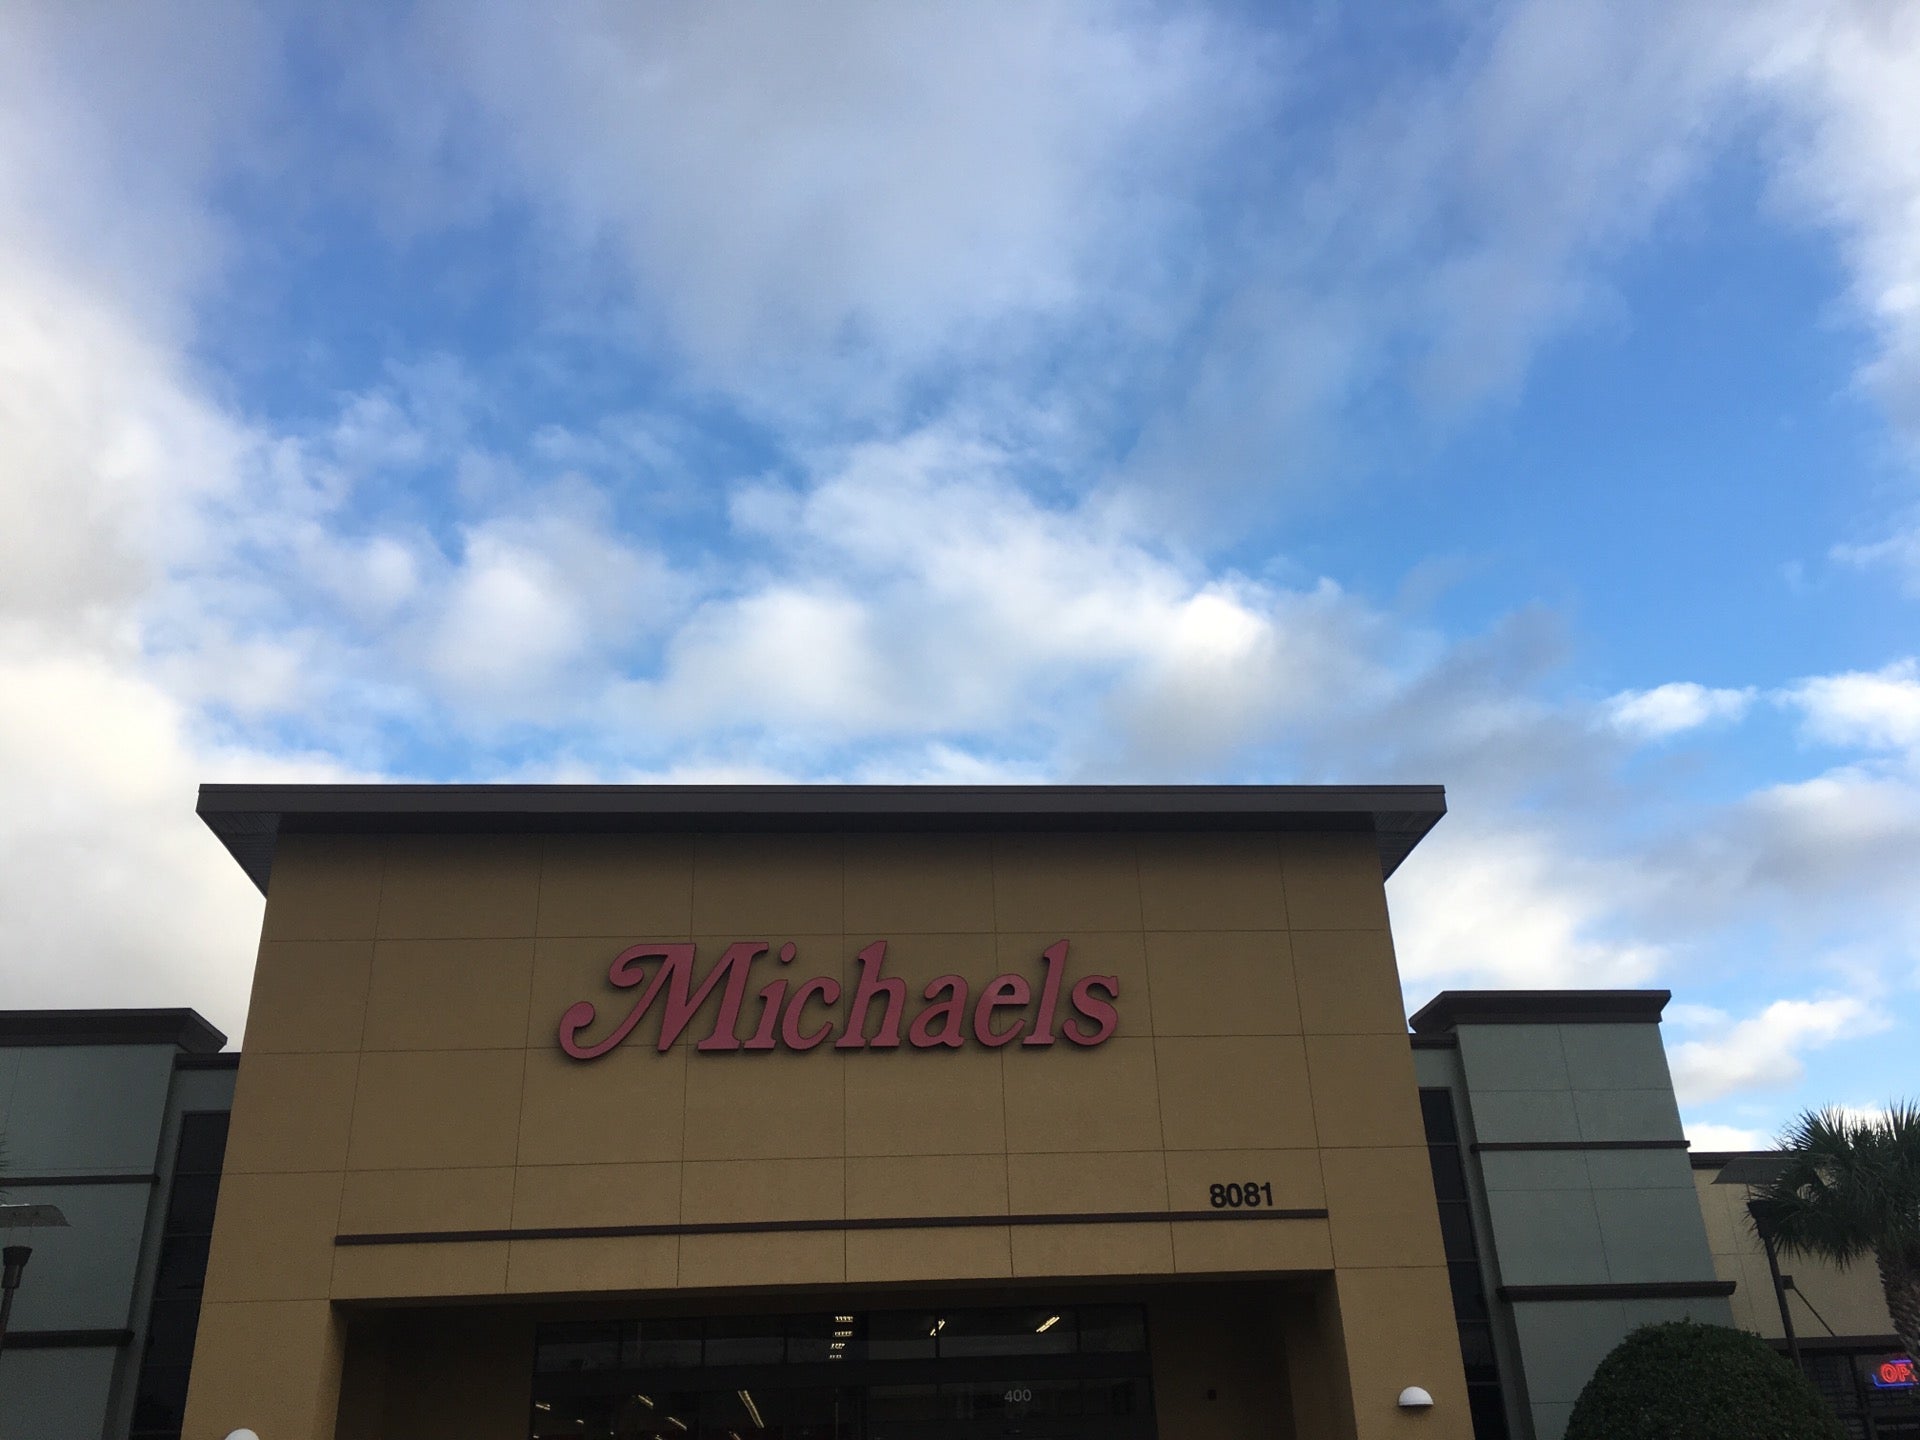 Michaels, [6901 - 6921] Eagle Watch Dr, Orlando, FL, Arts and